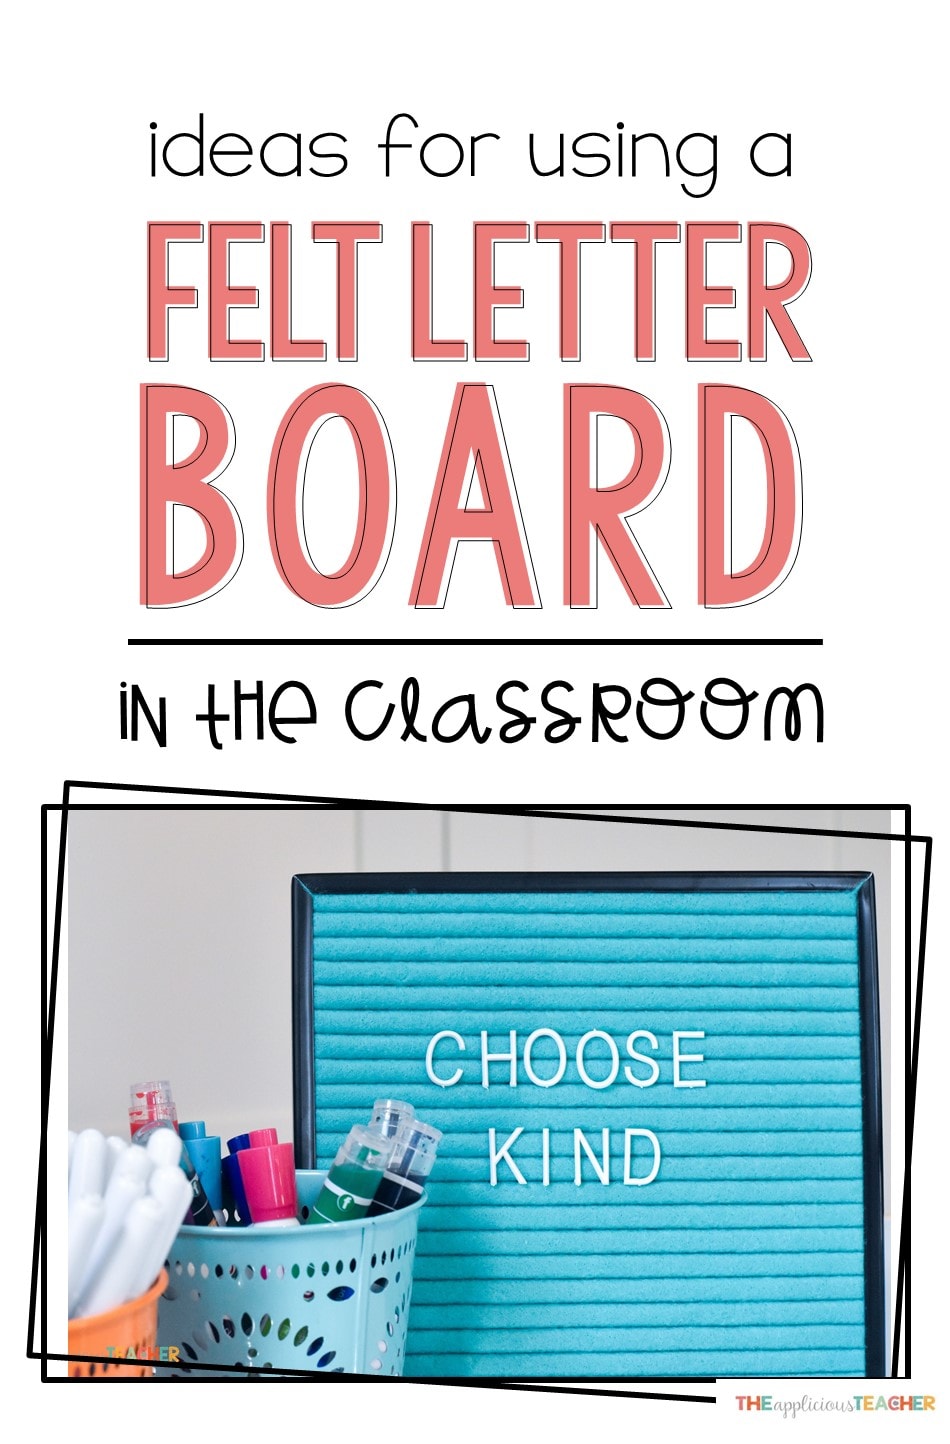 Felt letter board in the classroom. Great ideas on how to use felt letter boards in your classroom all year round!